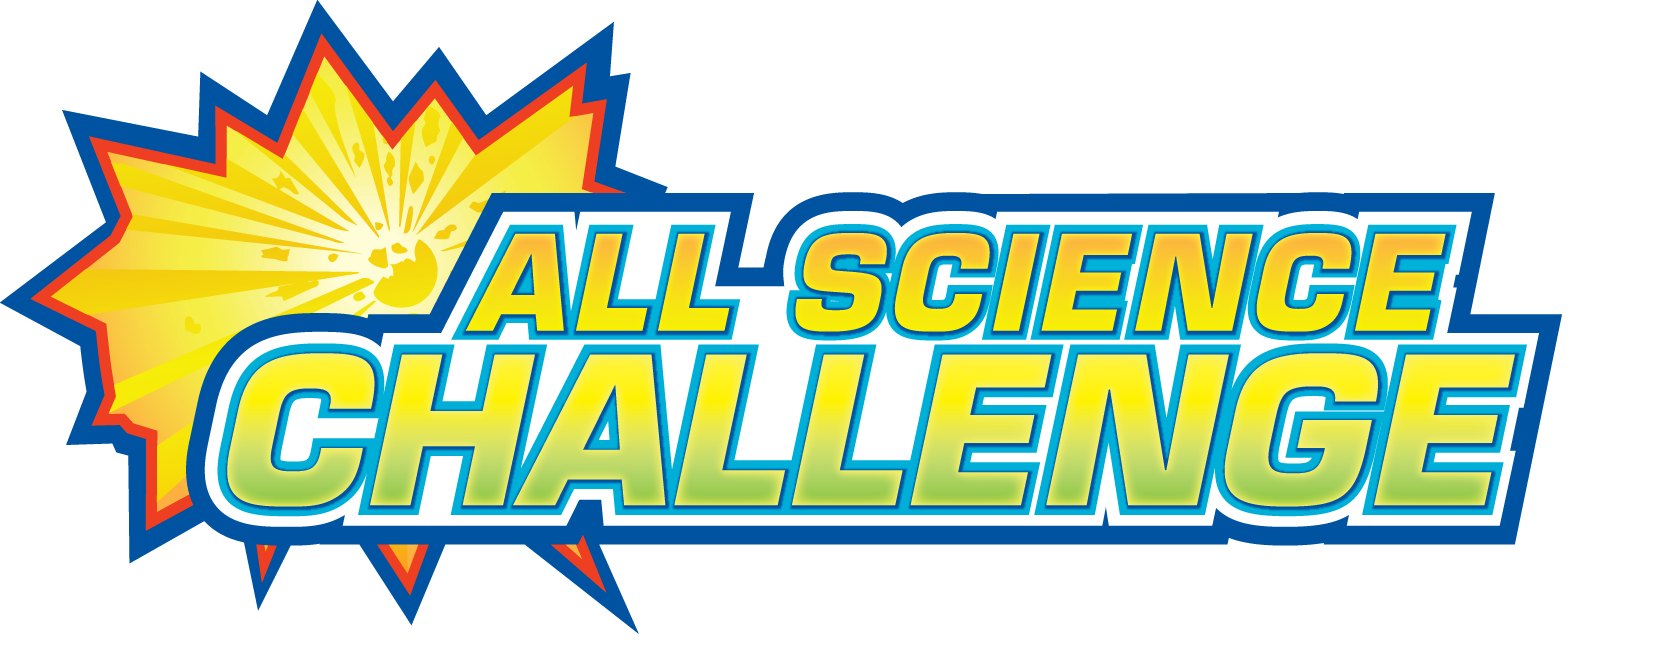 All Science Challenge logo